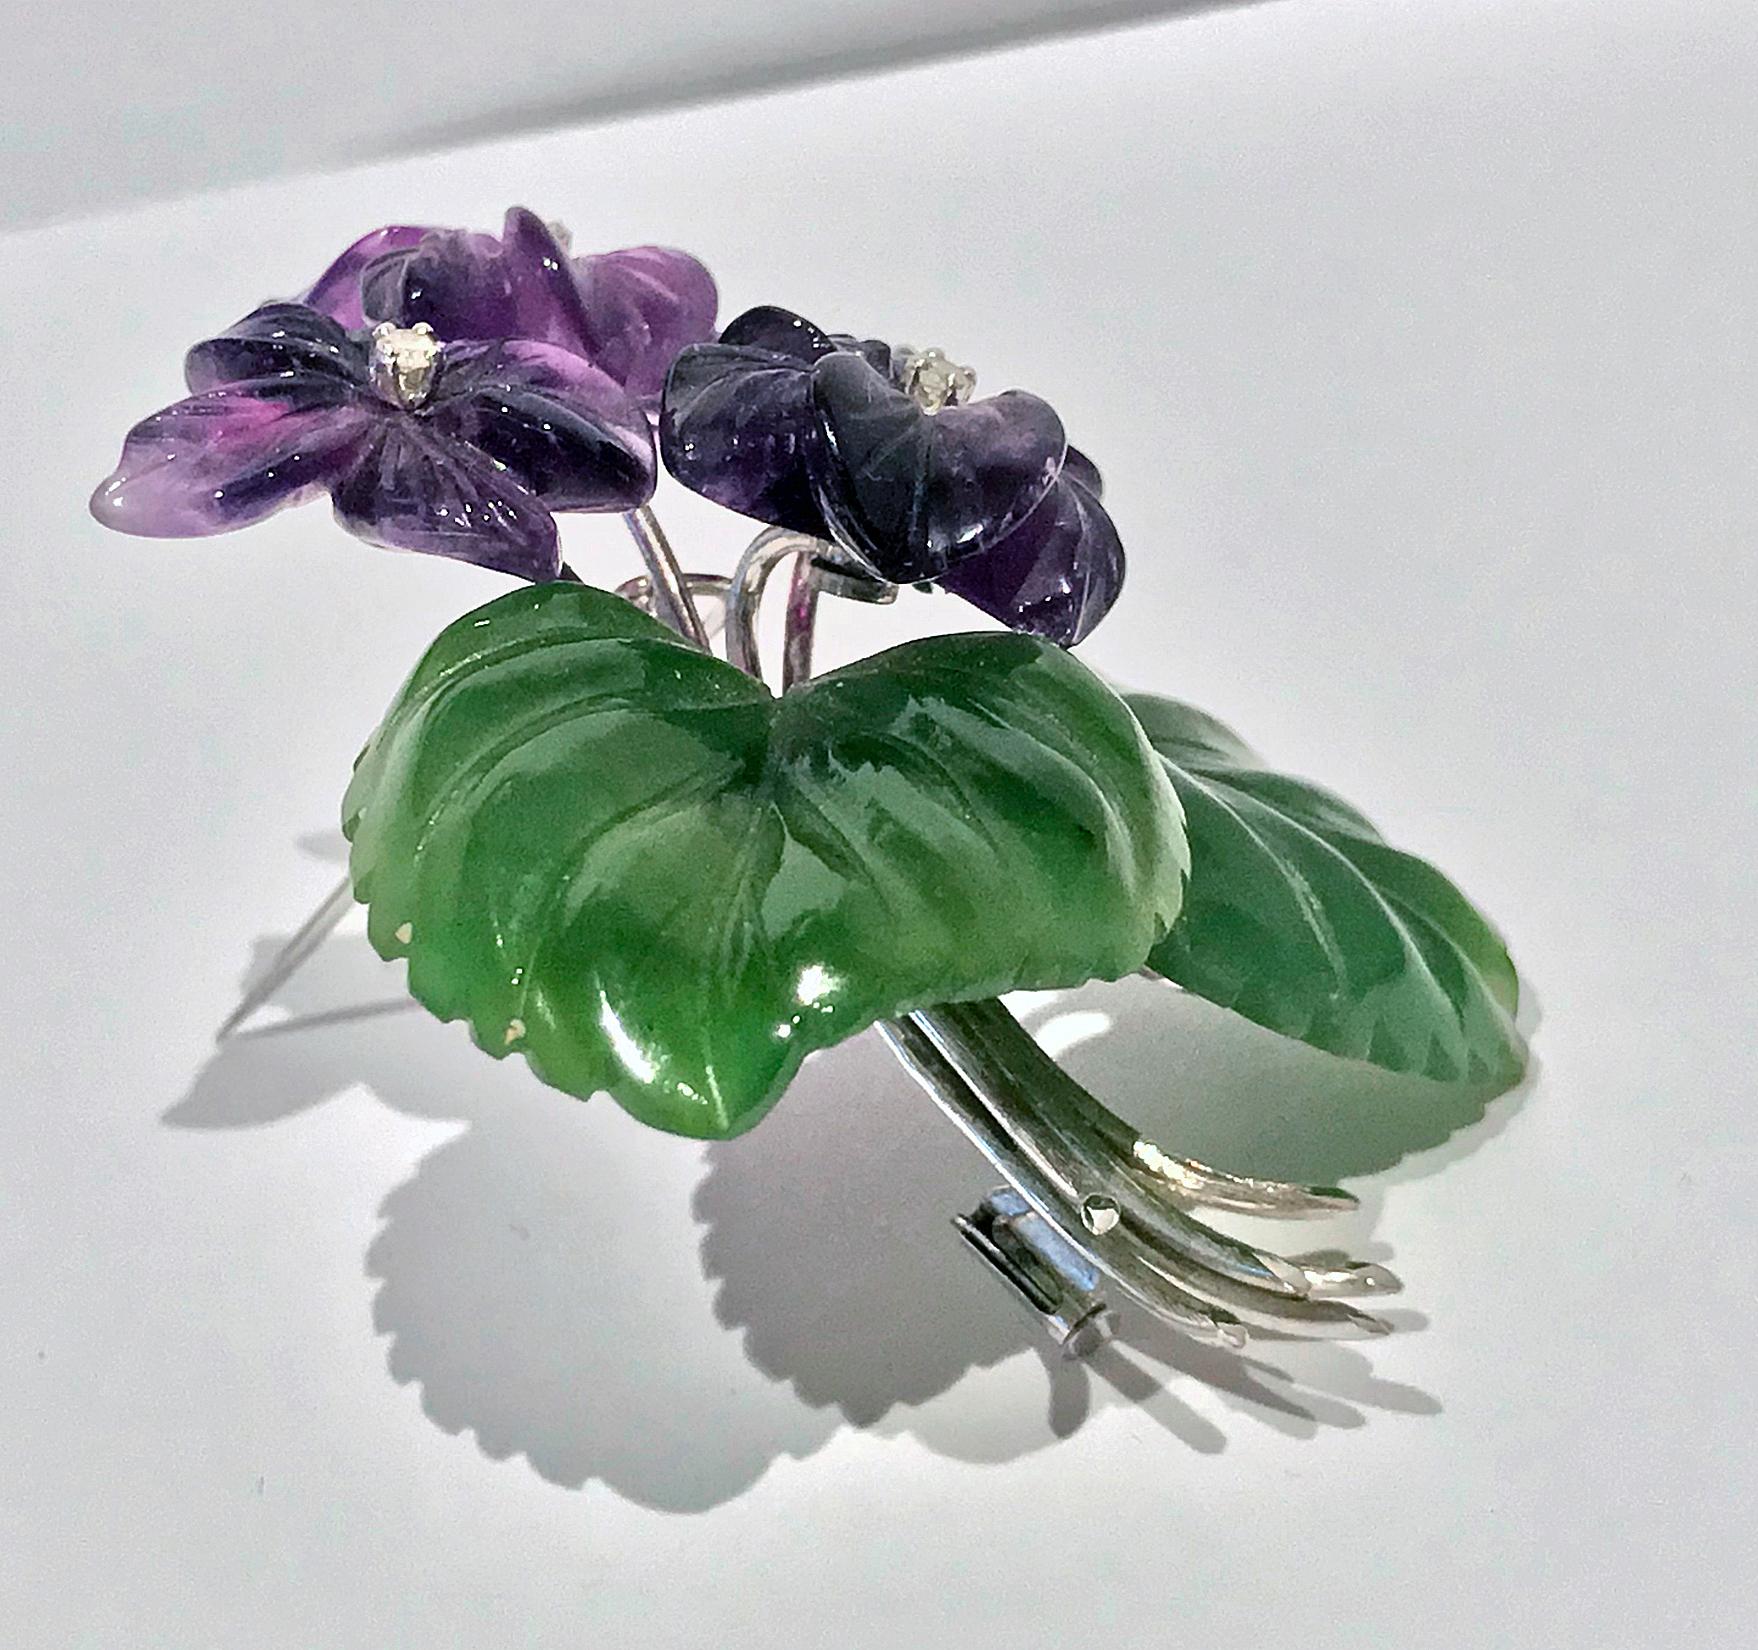 Large Carved Nephrite, Amethyst and Diamond 14K Brooch, Austria C.1950. The brooch with four foliate amethyst colour flowers, inset with four single cut diamonds, the surrounding foliage of large carved nephrite leaves, all surmounted on white gold